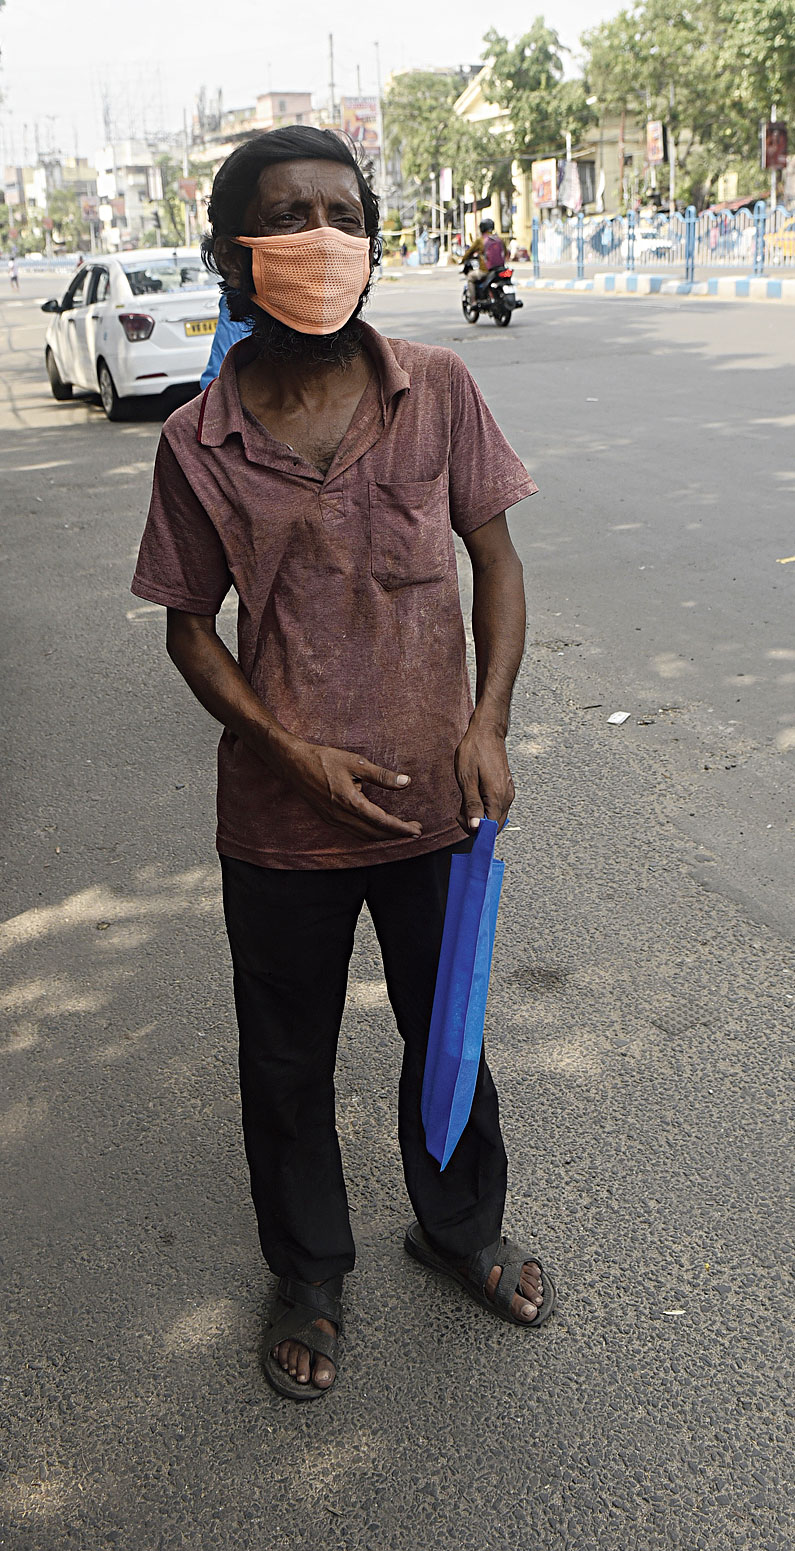 Biplab Banerjee, with two units of blood for his daughter’s dialysis in the blue packet, waits for a bus at Hazra to reach a Bagbazar nursing home